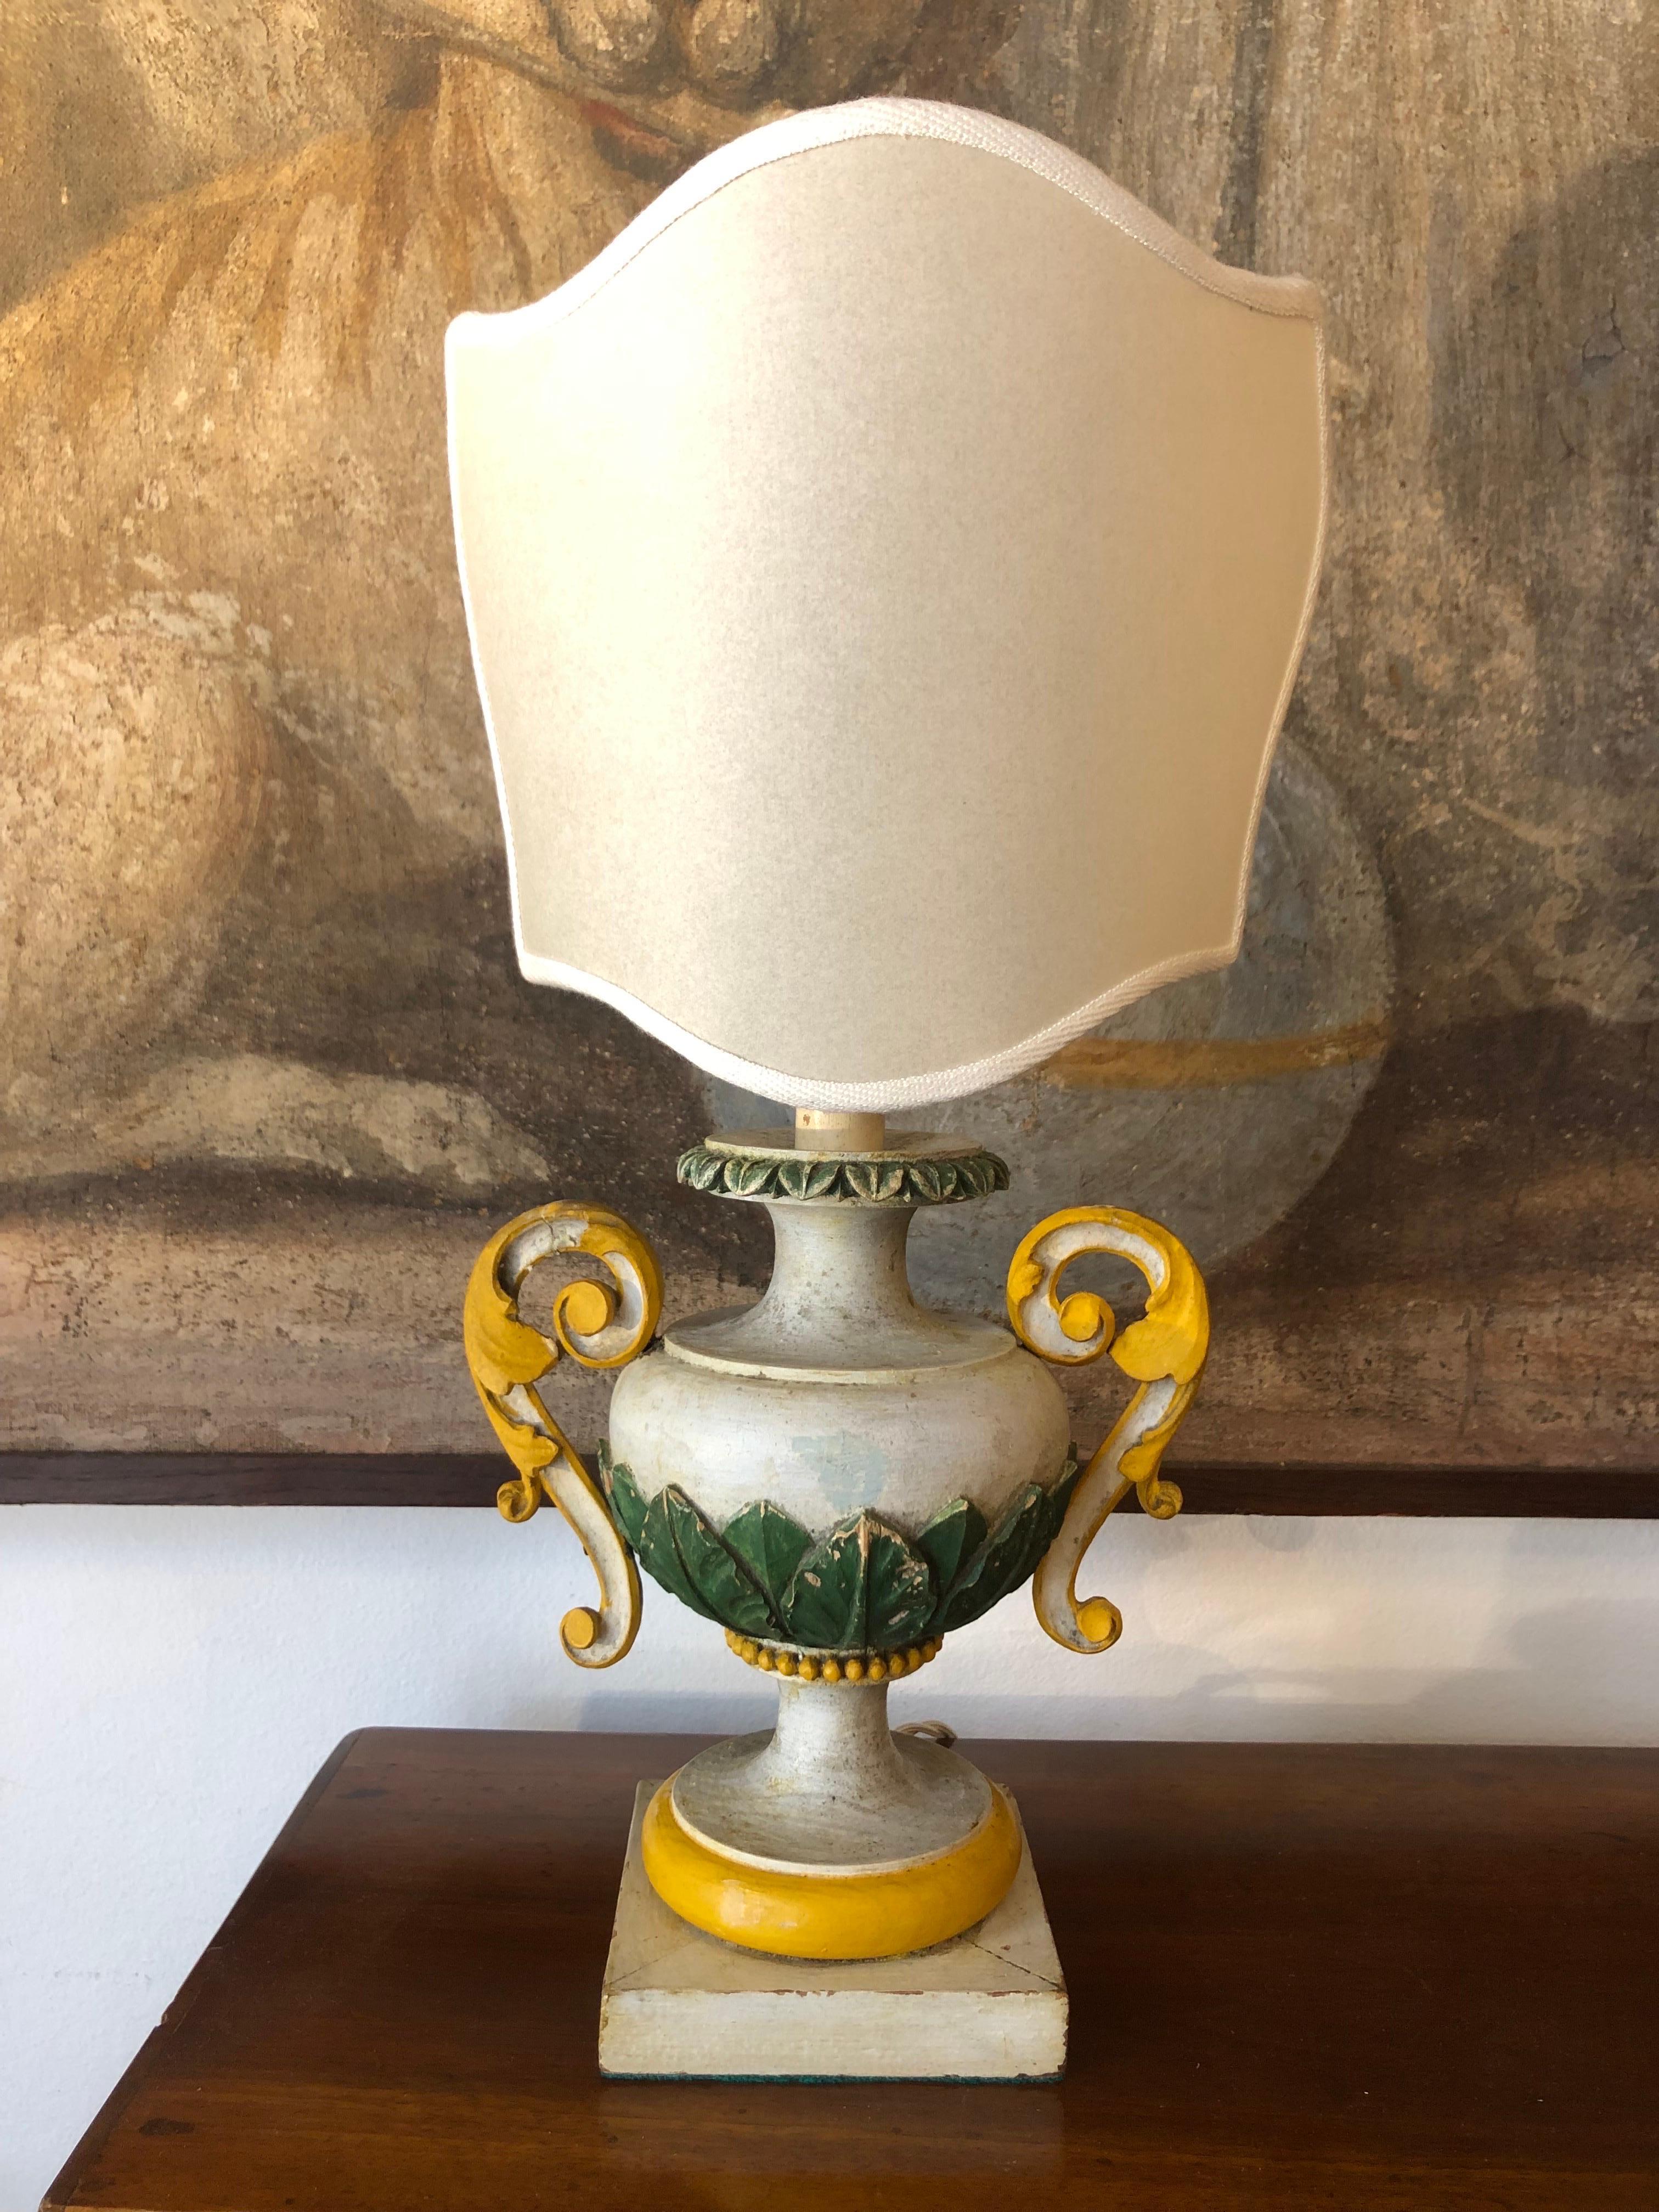 Pair Of Italian Bedside Lamps 1800 urns carved and lacquered in the tones of Gray, Green and Ochre with shield shade, using as bases two antique palm holders lacquered in the tones of ochre and green in different shades on a gray background. The